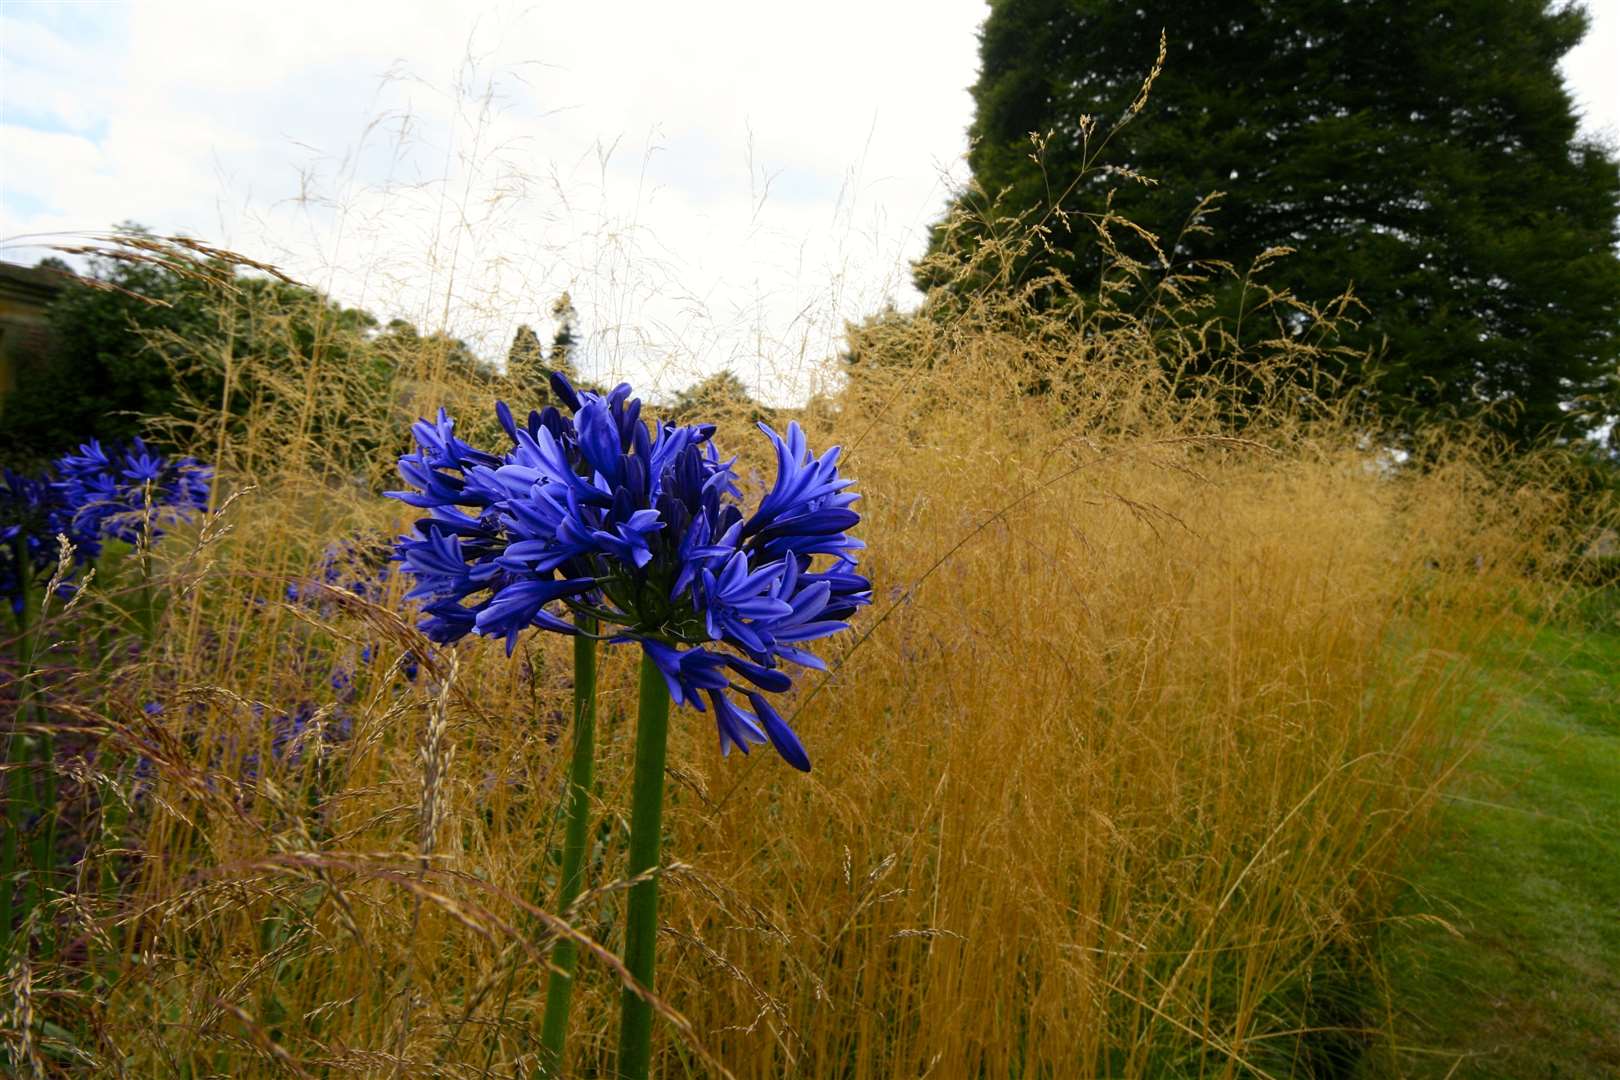 Agapanthus and grasses from Perennial's 'Sanctuary Garden' at RHS Hampton Court